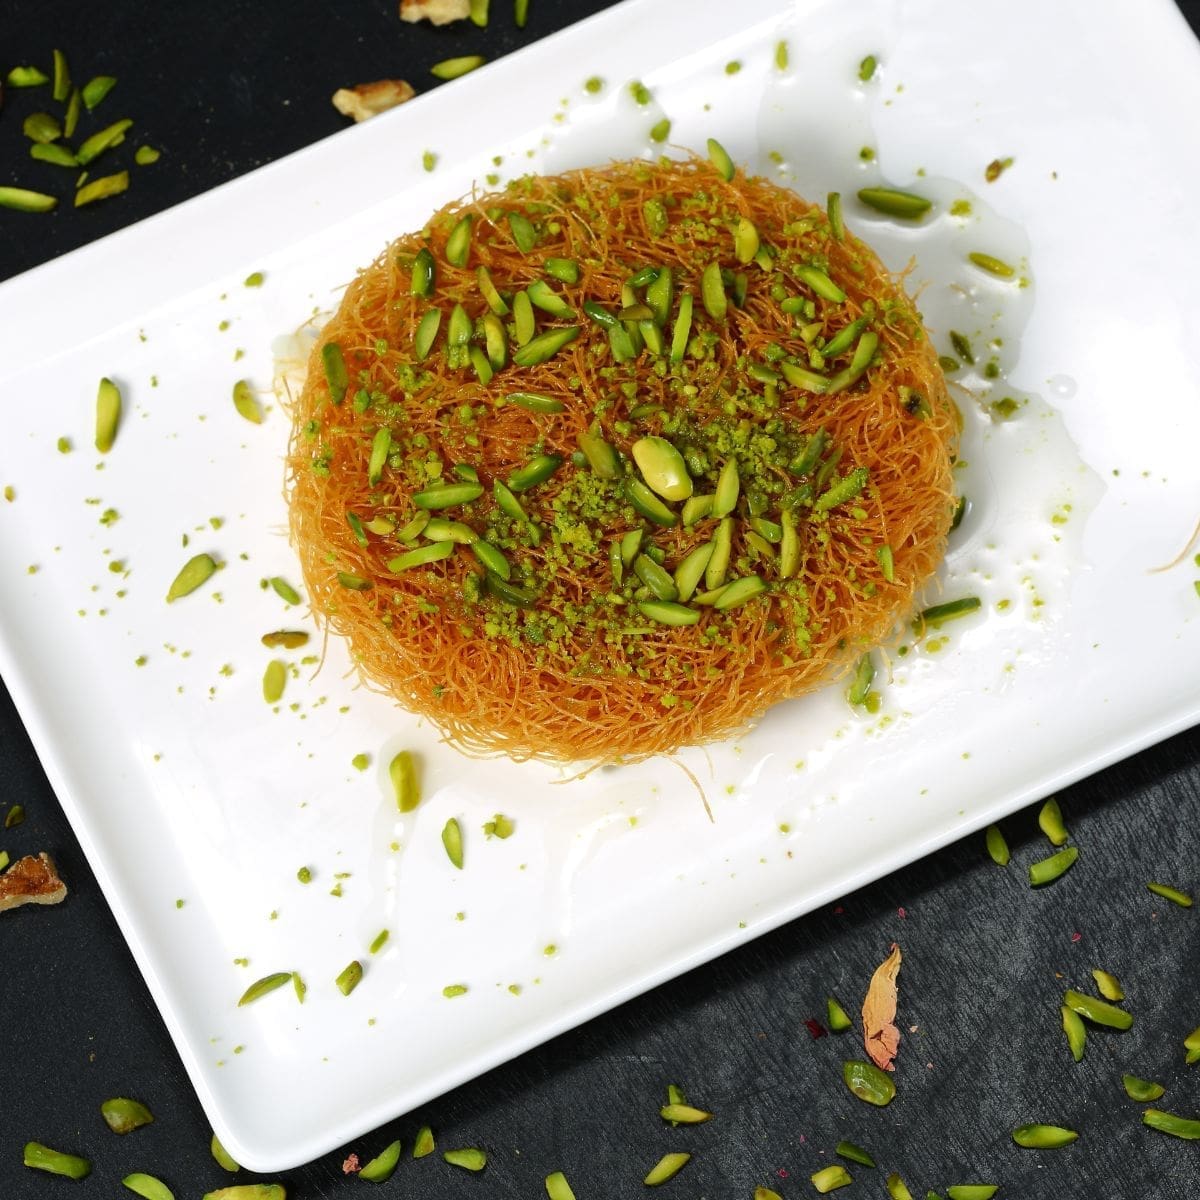 😋 13 BEST Lebanese Desserts: Traditional Sweet Flavored Treats! 😋